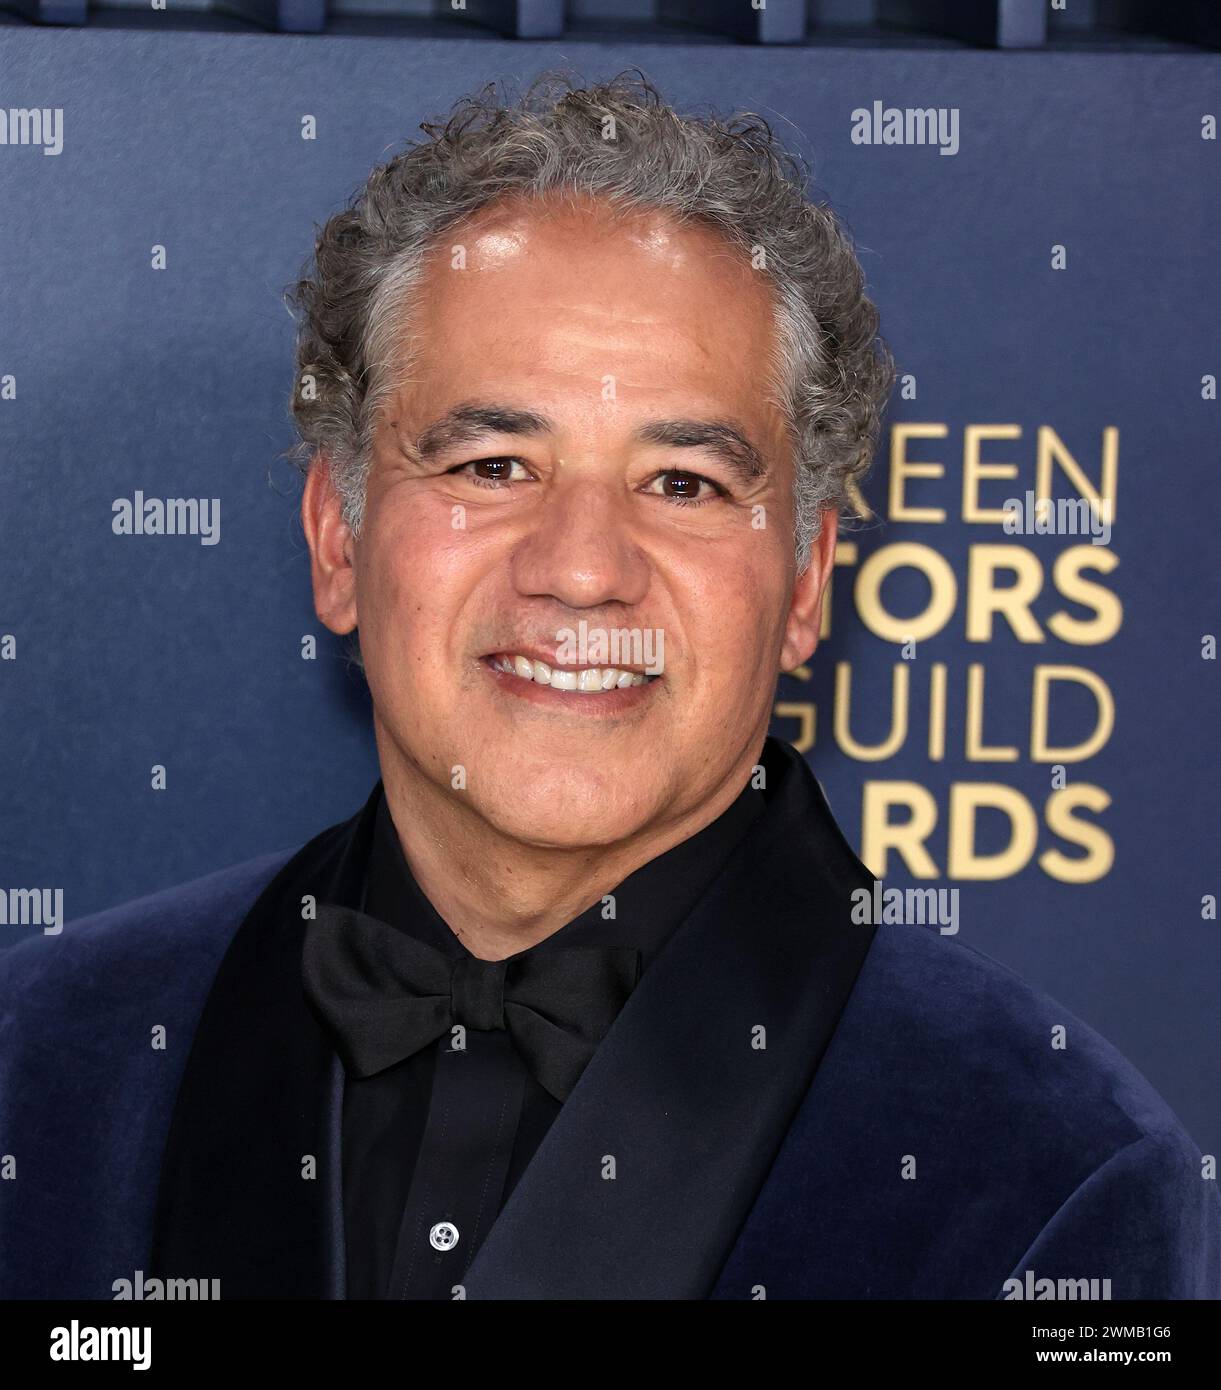 LOS ANGELES, CALIFORNIA, USA - FEBRUARY 24: John Ortiz arrives at the 30th Annual Screen Actors Guild Awards held at the Shrine Auditorium and Expo Hall on February 24, 2024 in Los Angeles, California, United States. (Photo by Xavier Collin/Image Press Agency) Stock Photo